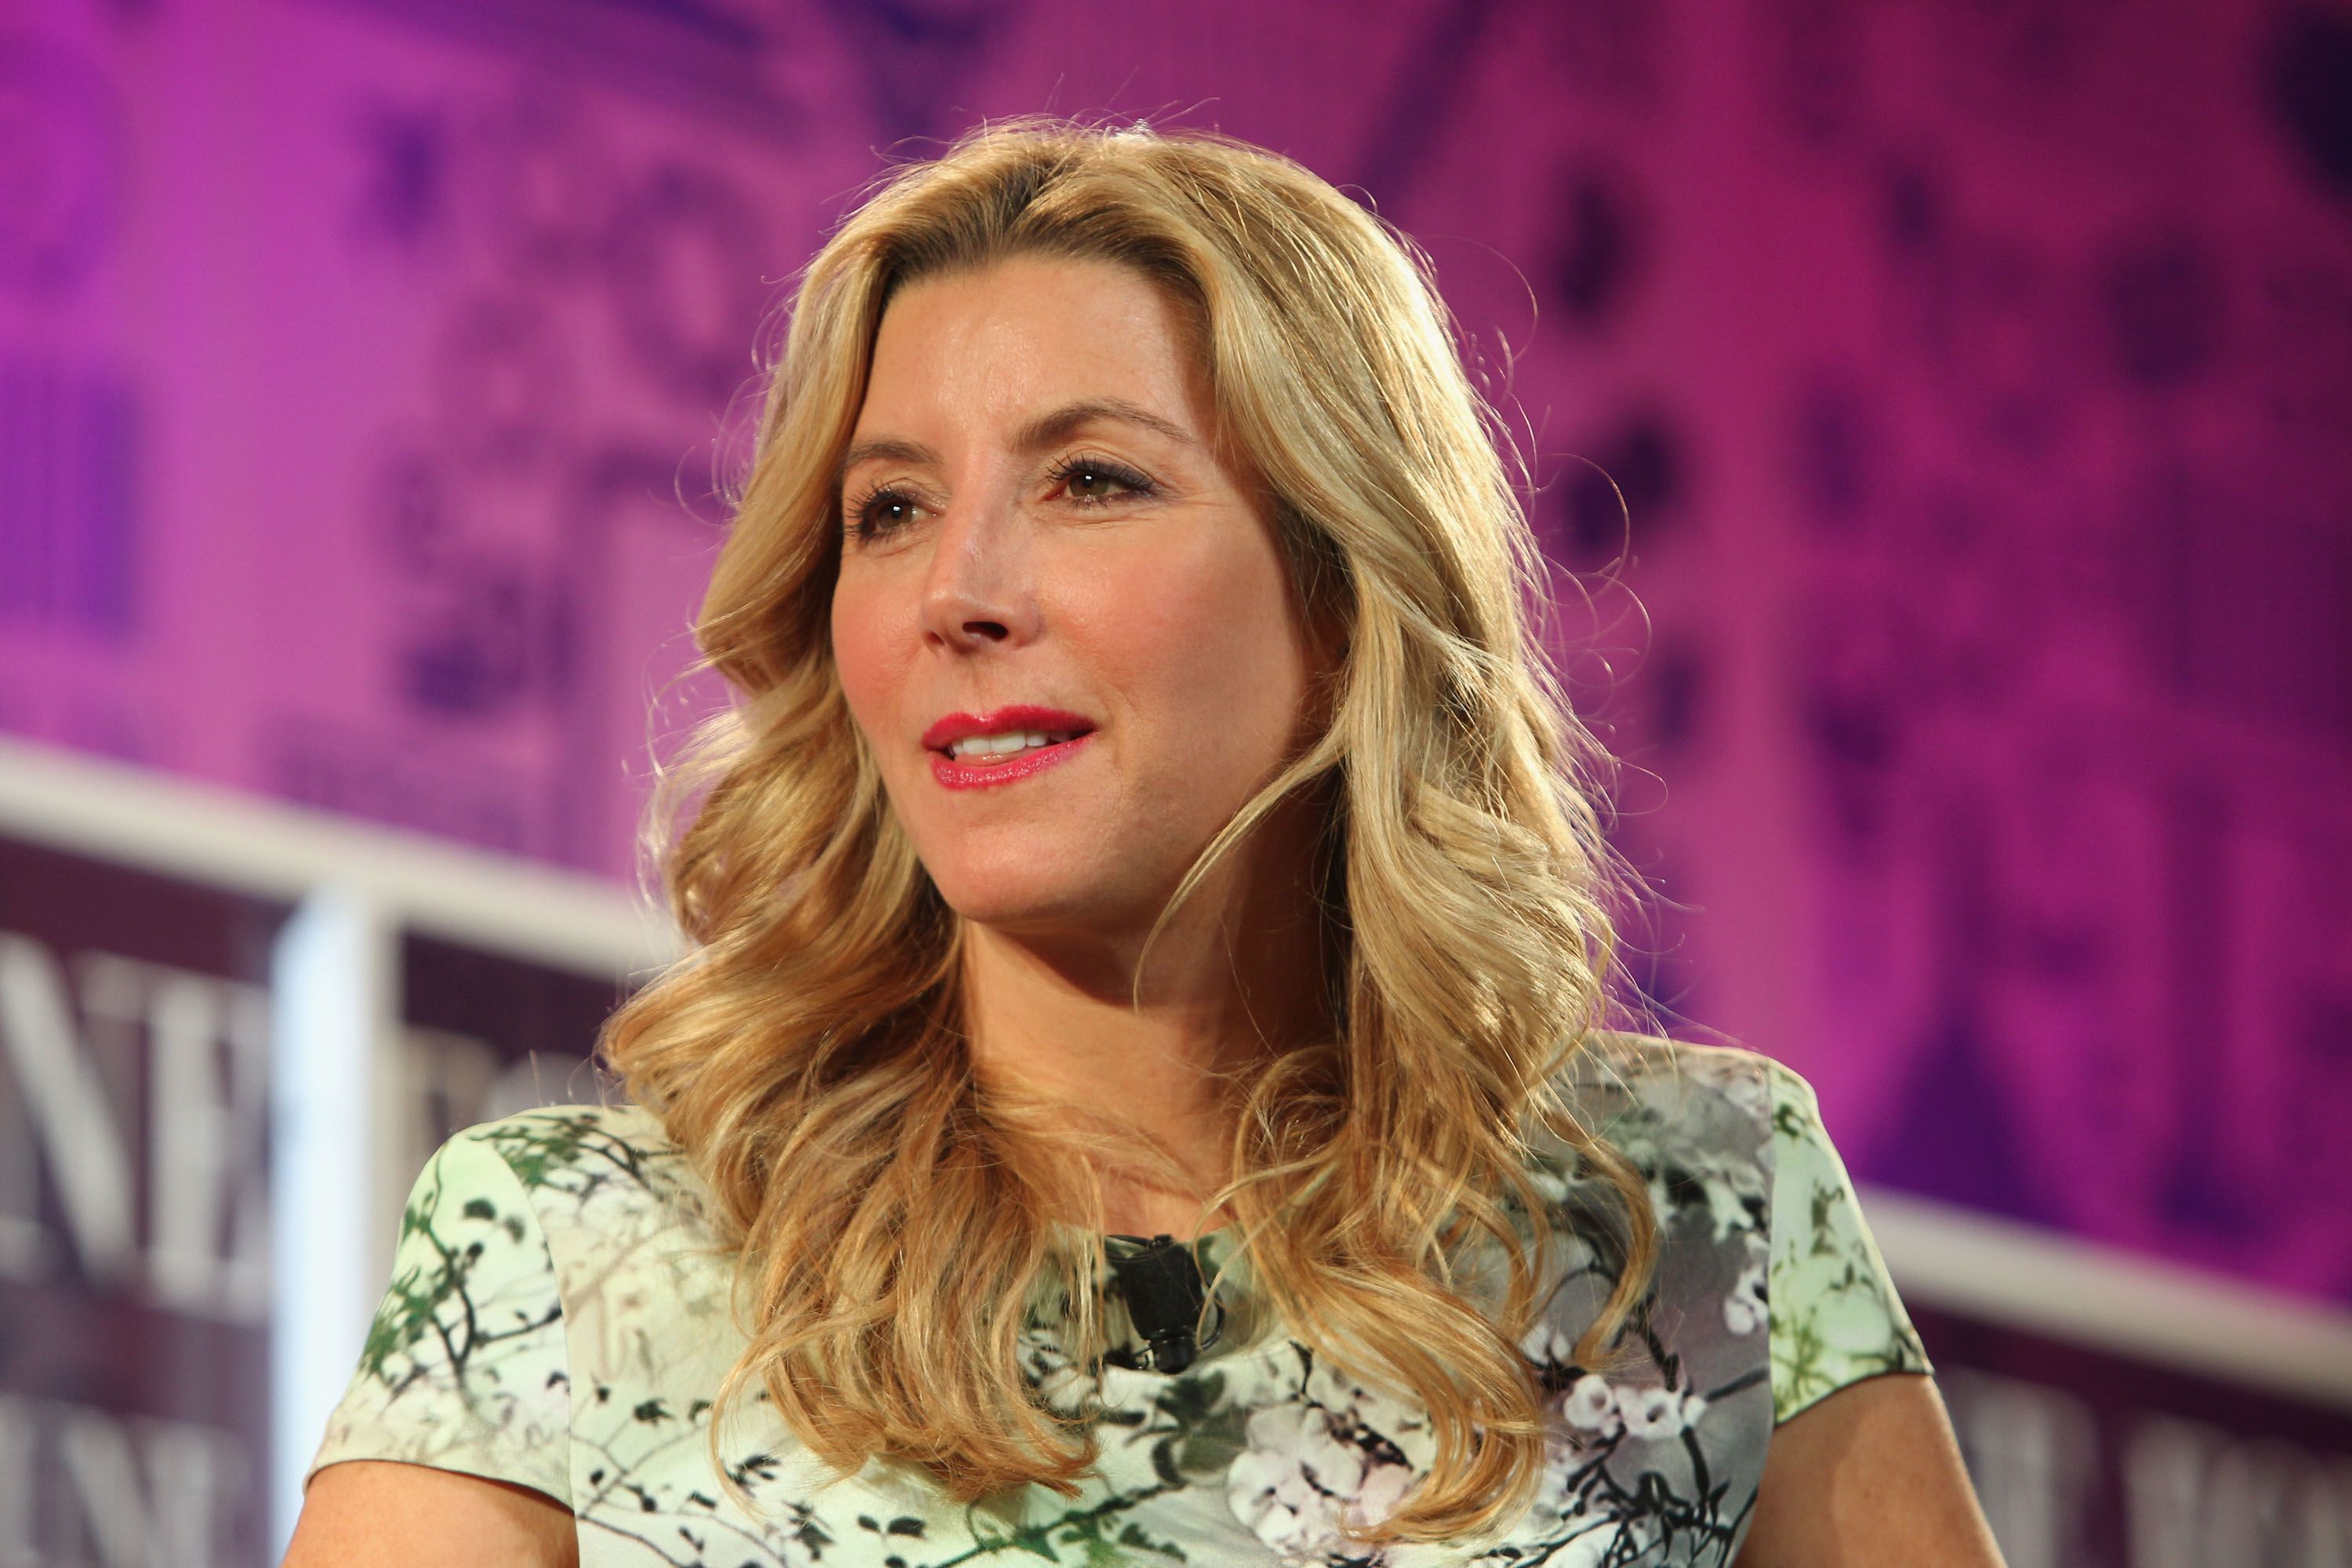 SPANX by Sara Blakely: Want Maximum Slimming? Introducing The NEW